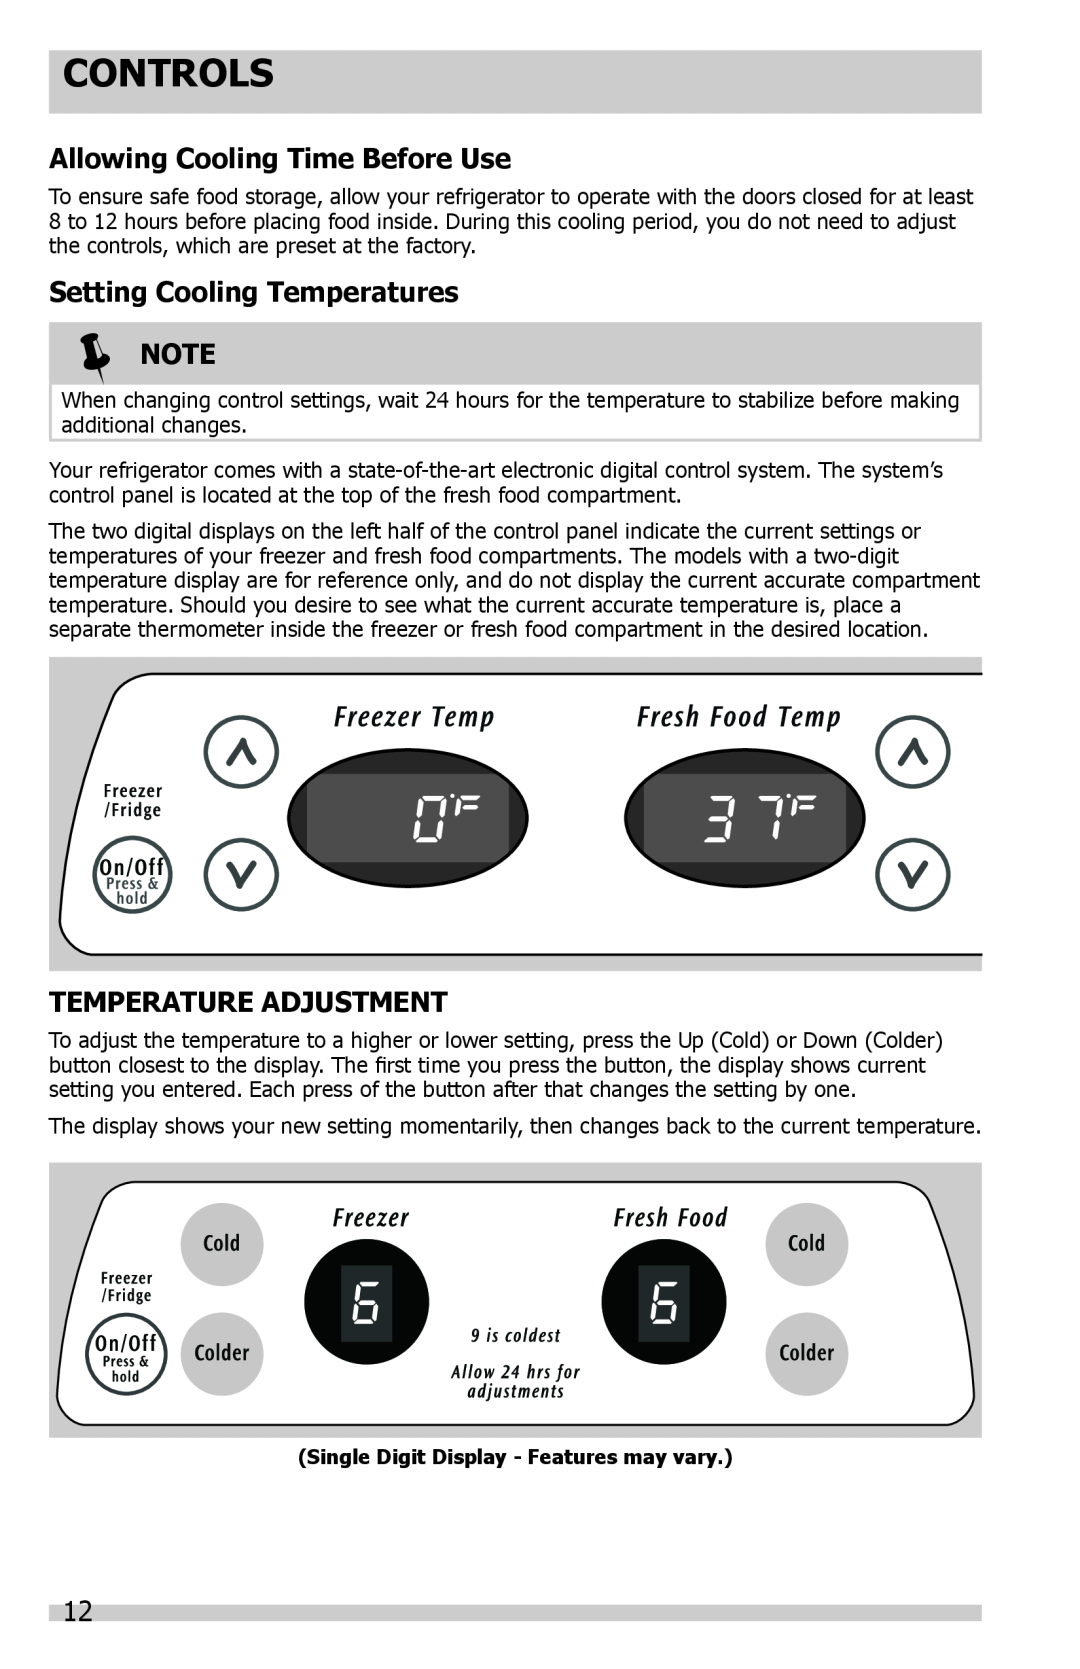 Frigidaire FFSS2614QS, FFSS2614QE, FFHS2622 Controls, Allowing Cooling Time Before Use, Setting Cooling Temperatures  NOTE 